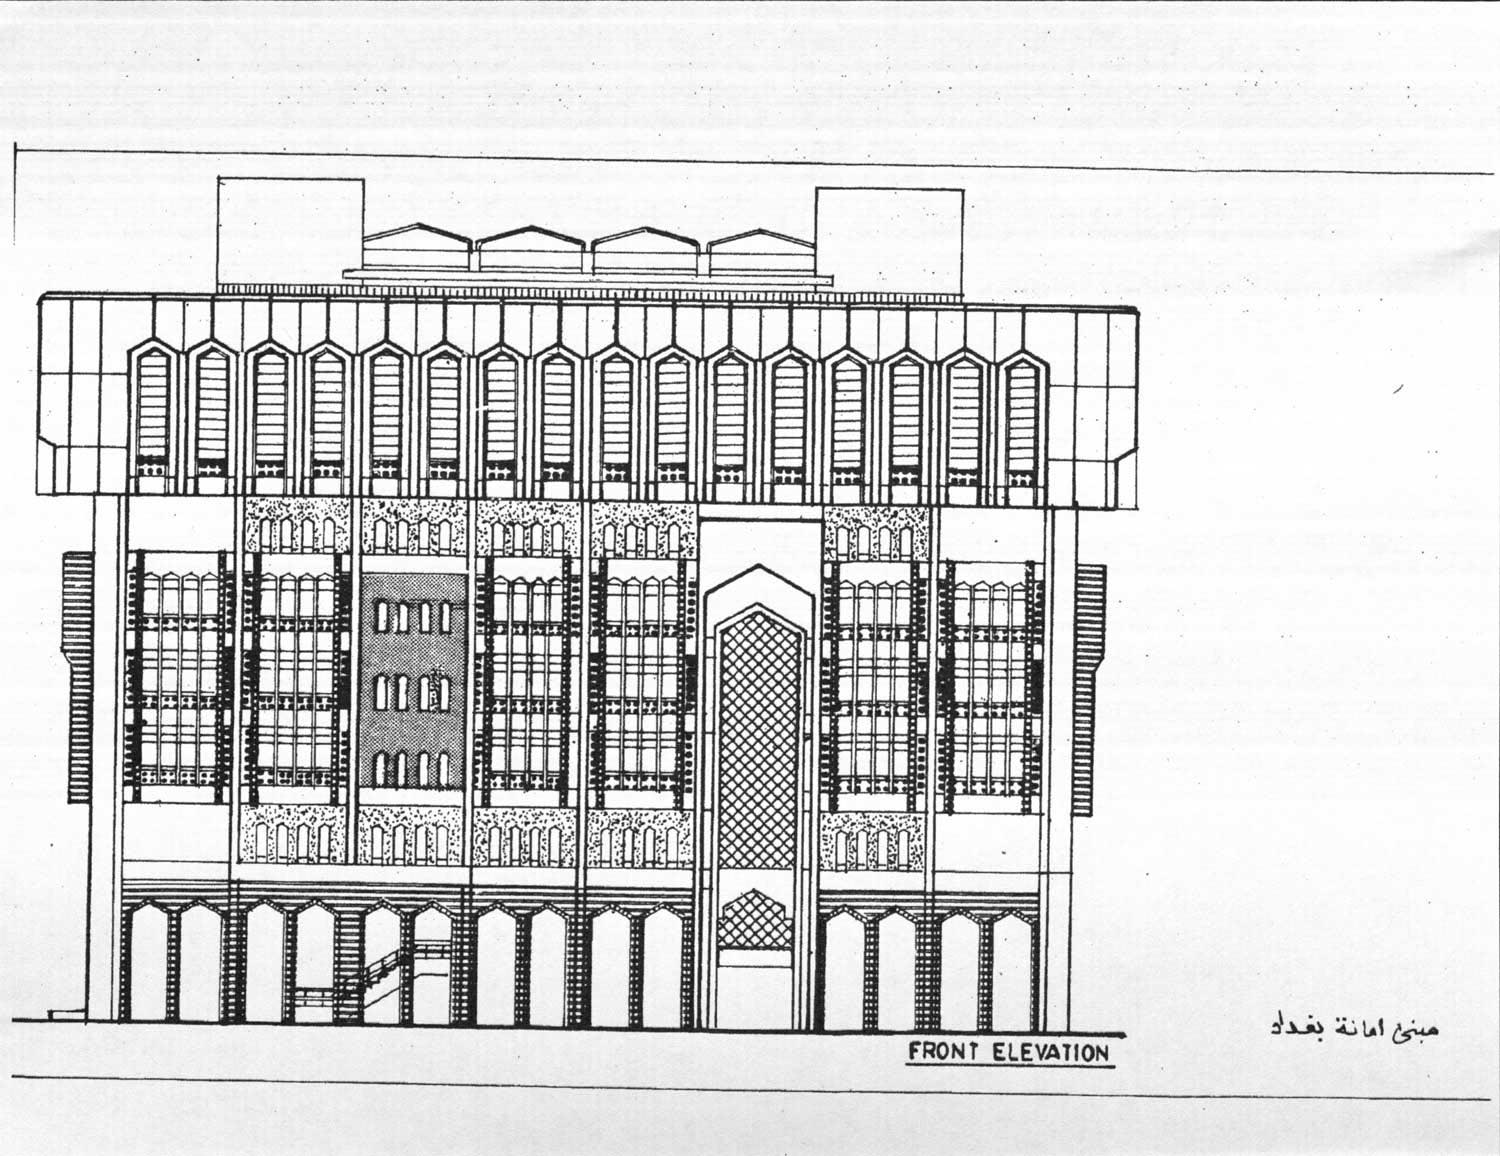 Architectural rendering showing the front elevation of the Mayor's Office Building. The drawing is labelled in English and Arabic.